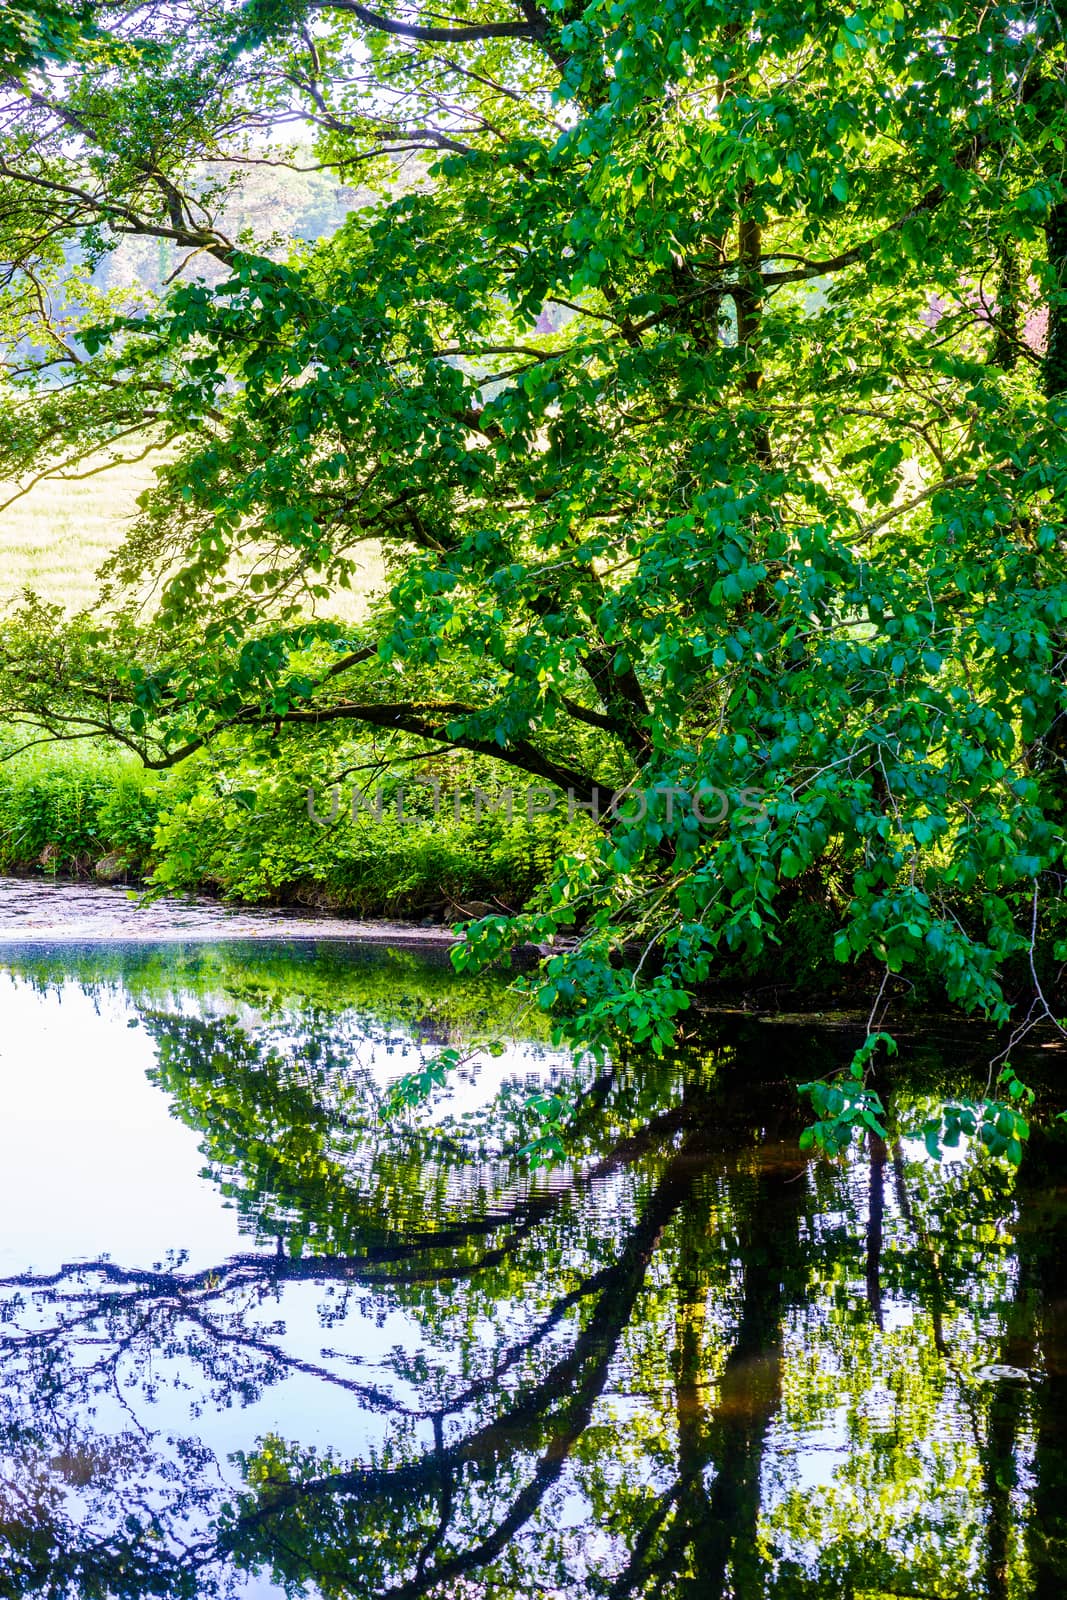 Sunny summer scene with small river and over hanging green trees.